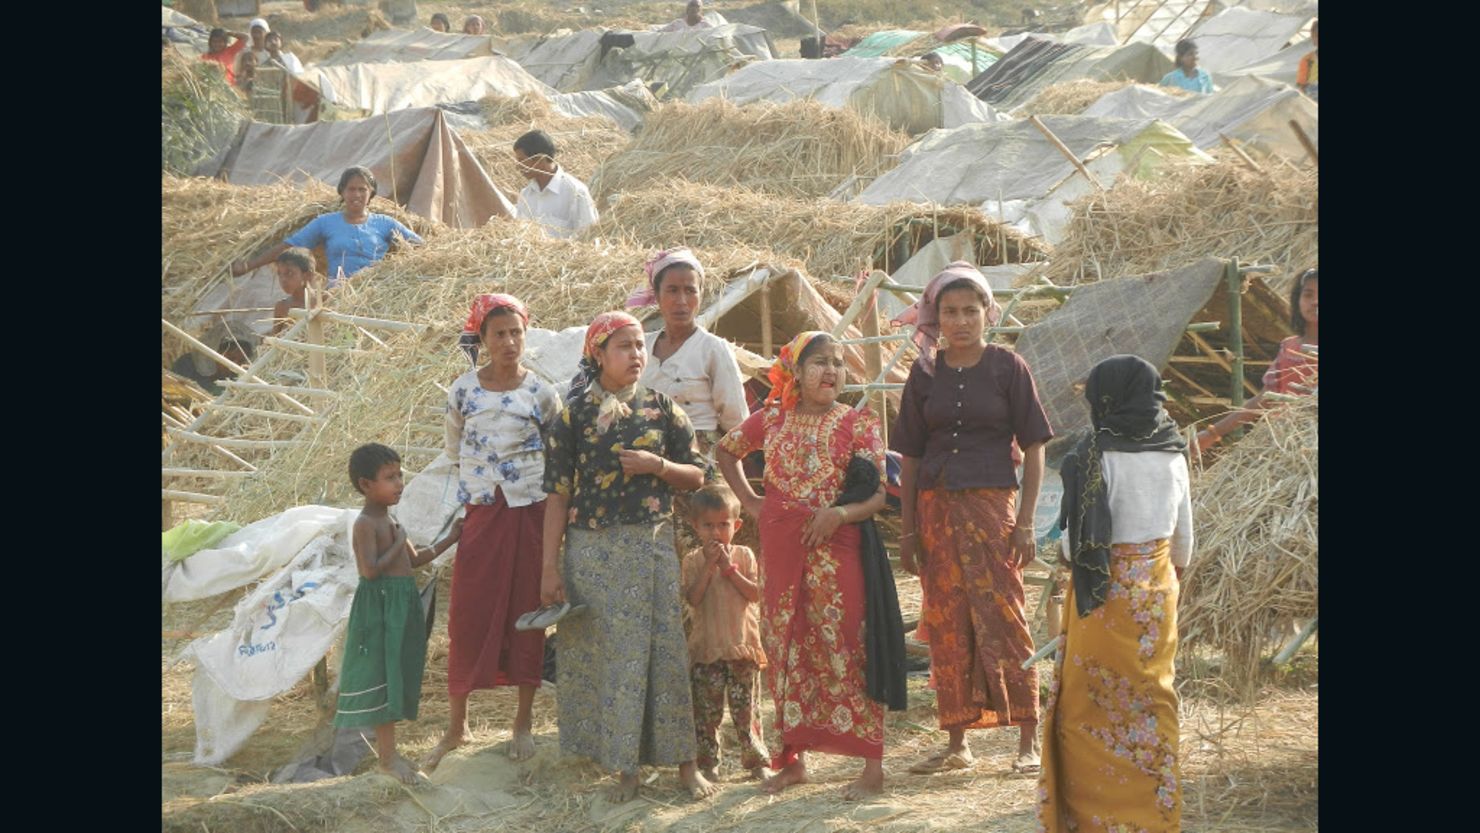 Muslim Rohingya people pictured at a makeshift camp in Sittwe, Myanmar in May 2013.